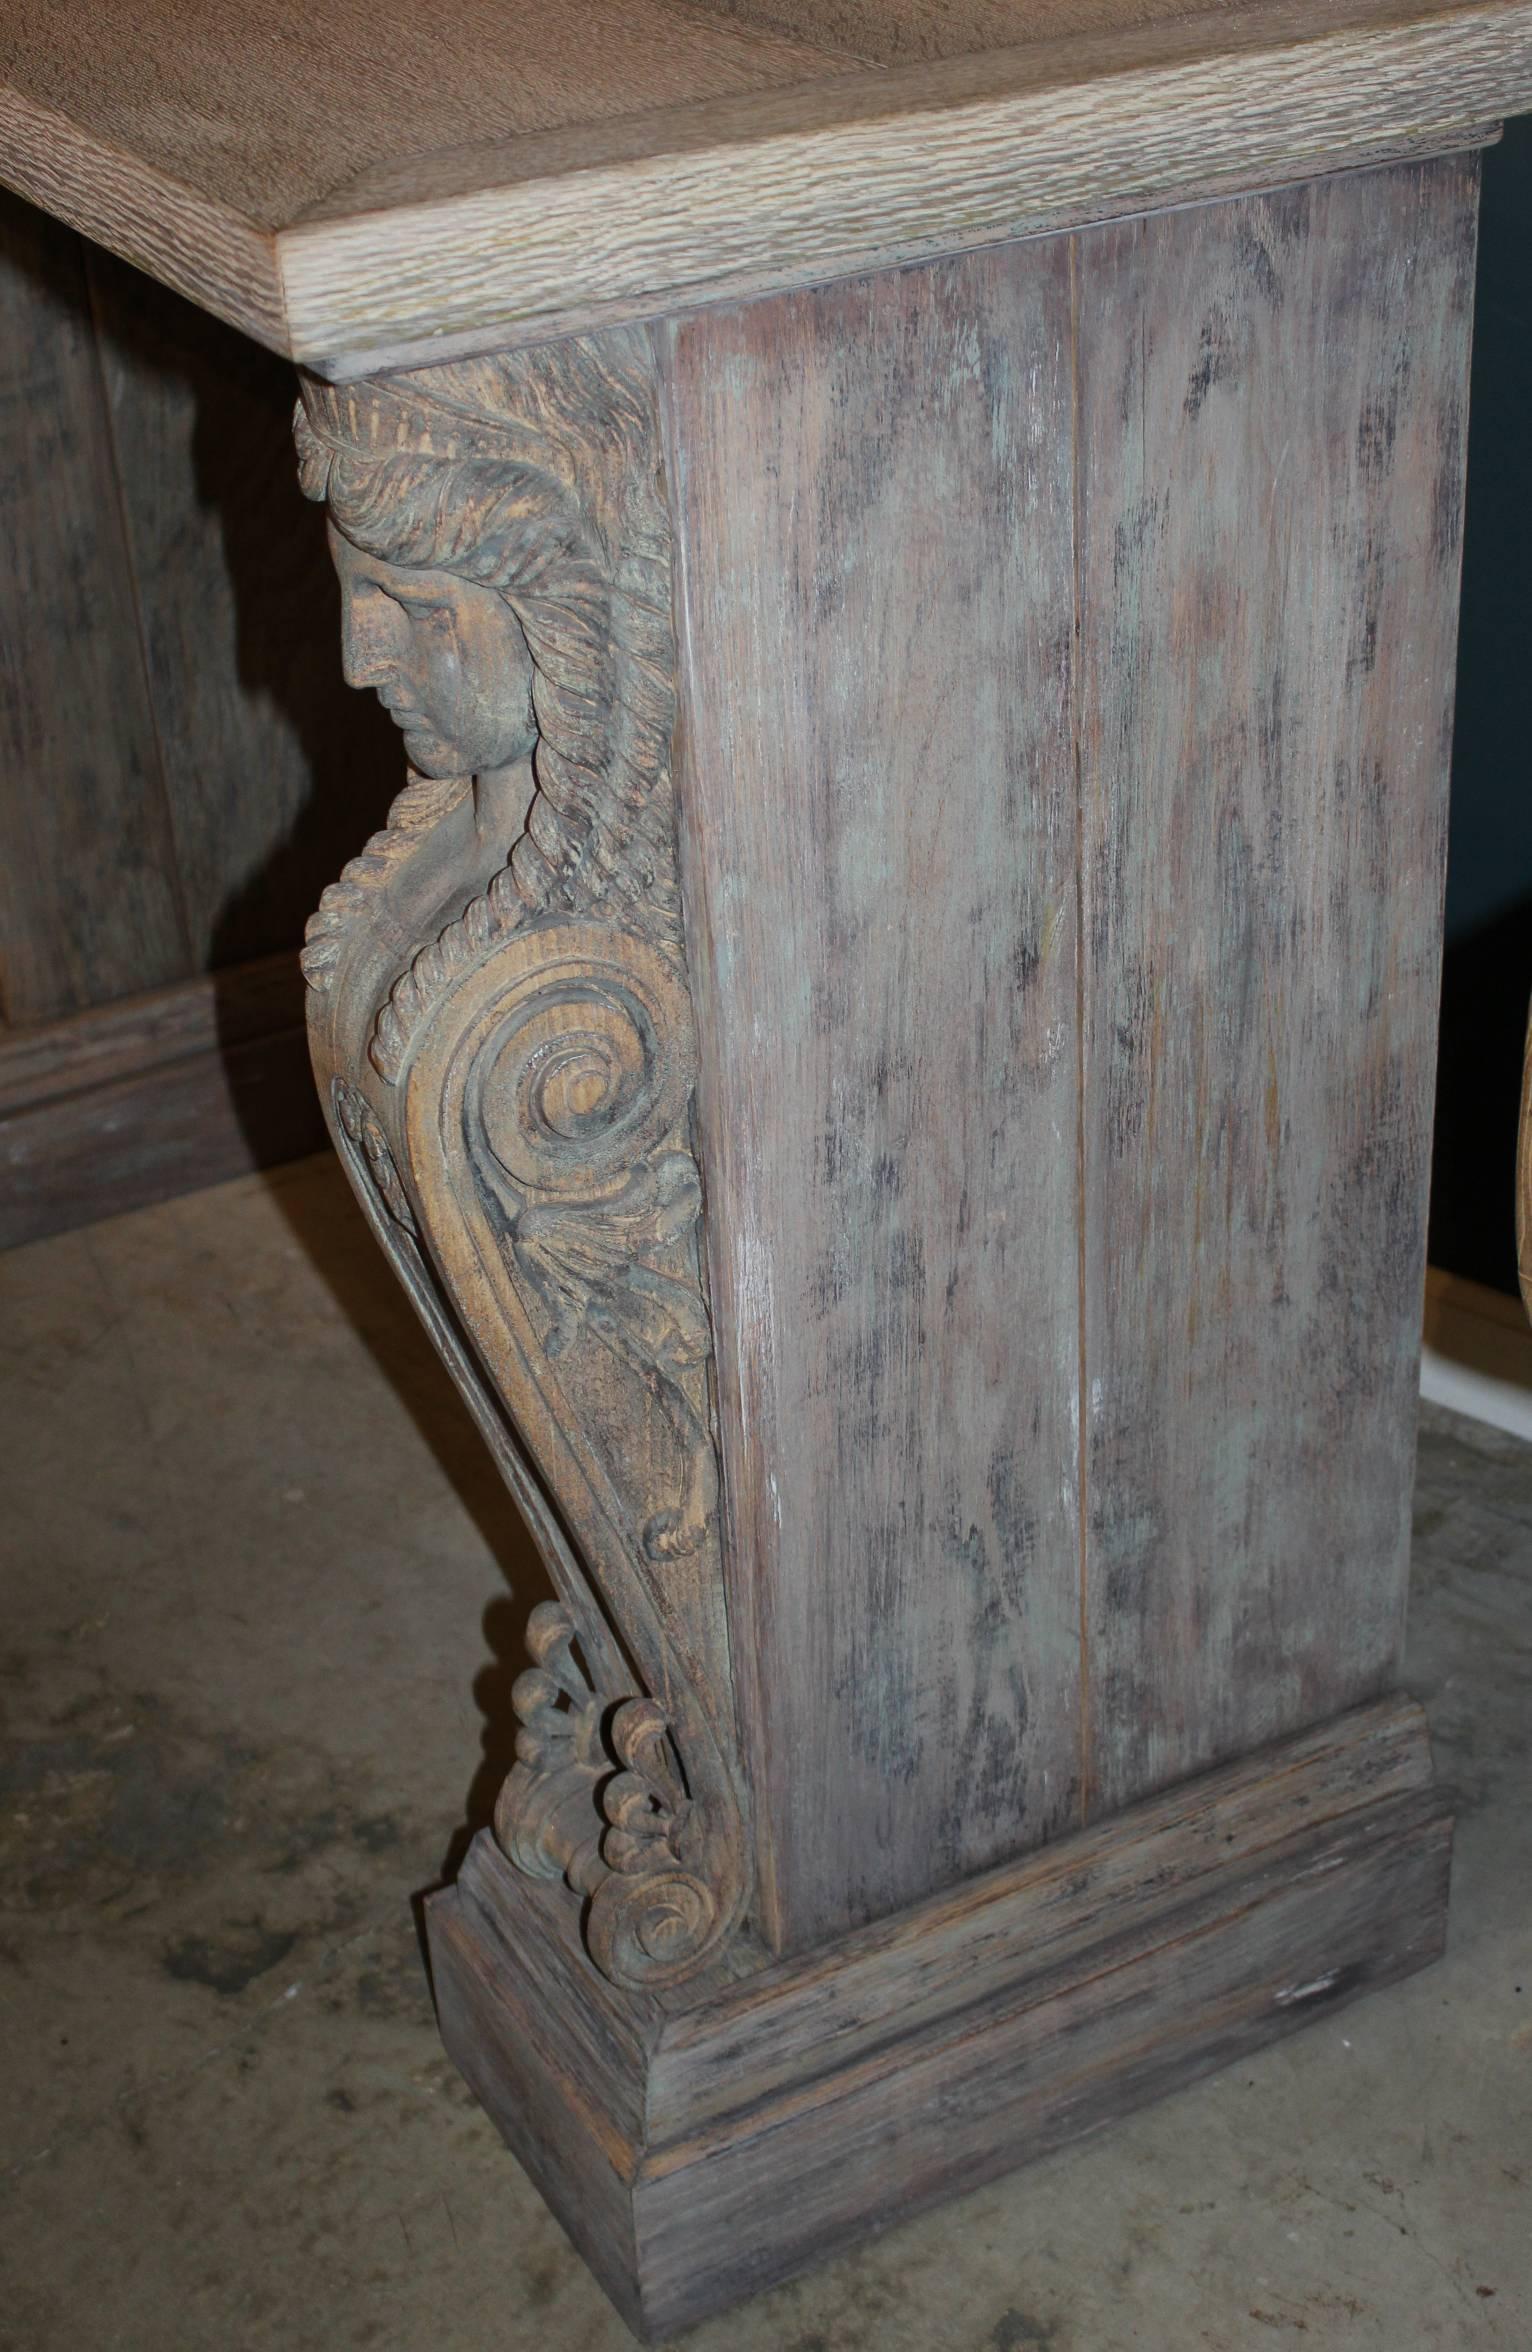 Carved French Empire Style Console with 19th Century Figural Caryatids